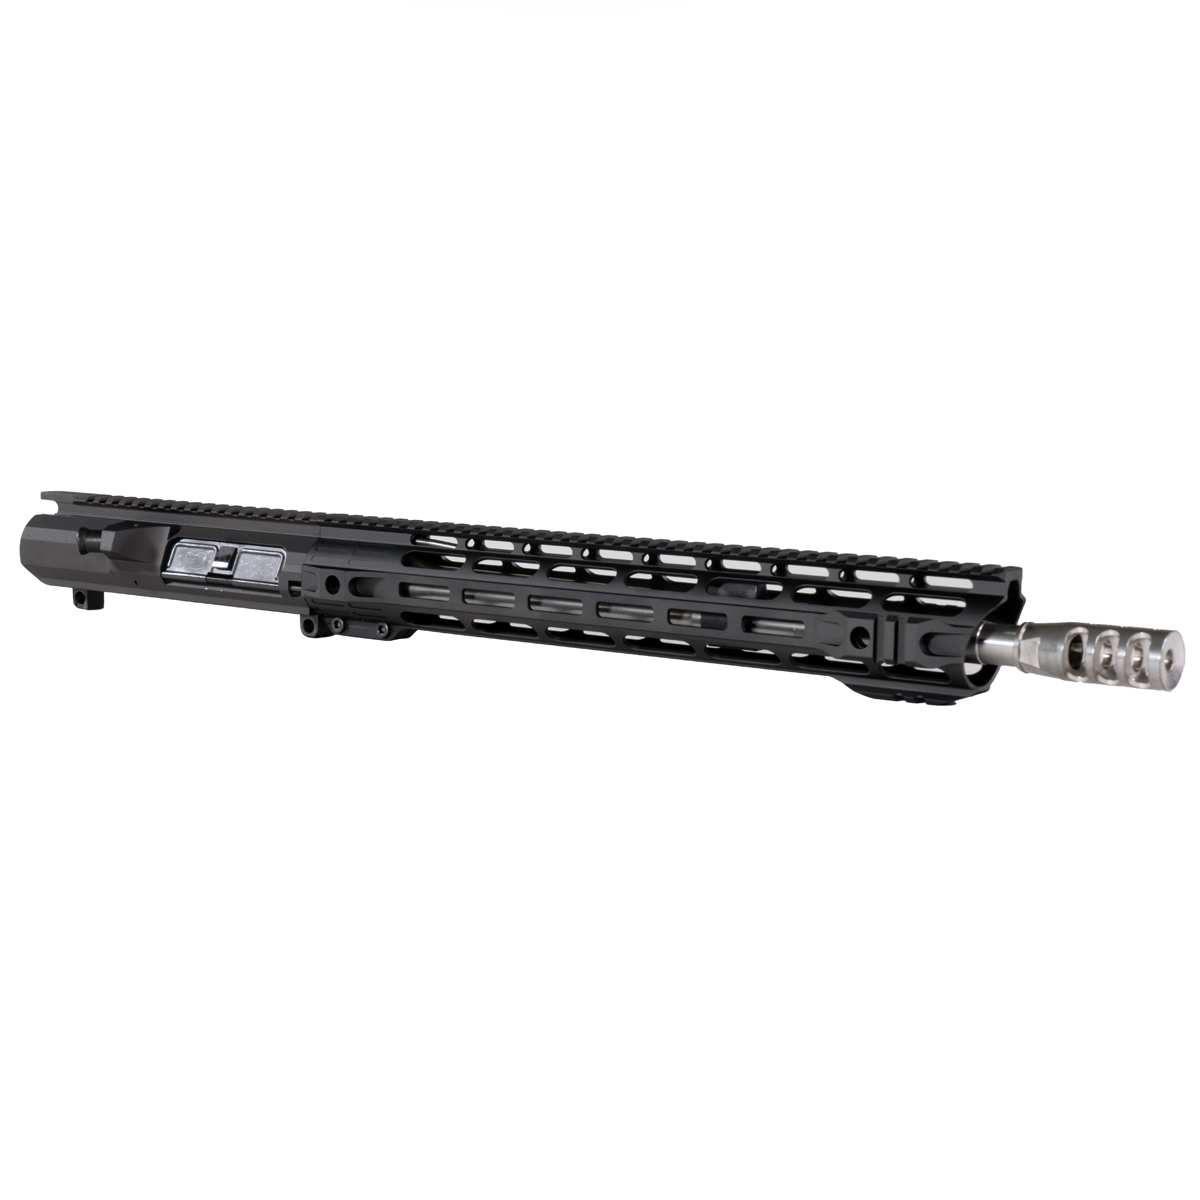 Davidson Defense 'Swiftwind' 16-inch LR-308 .308 Win Stainless Rifle Upper Build Kit